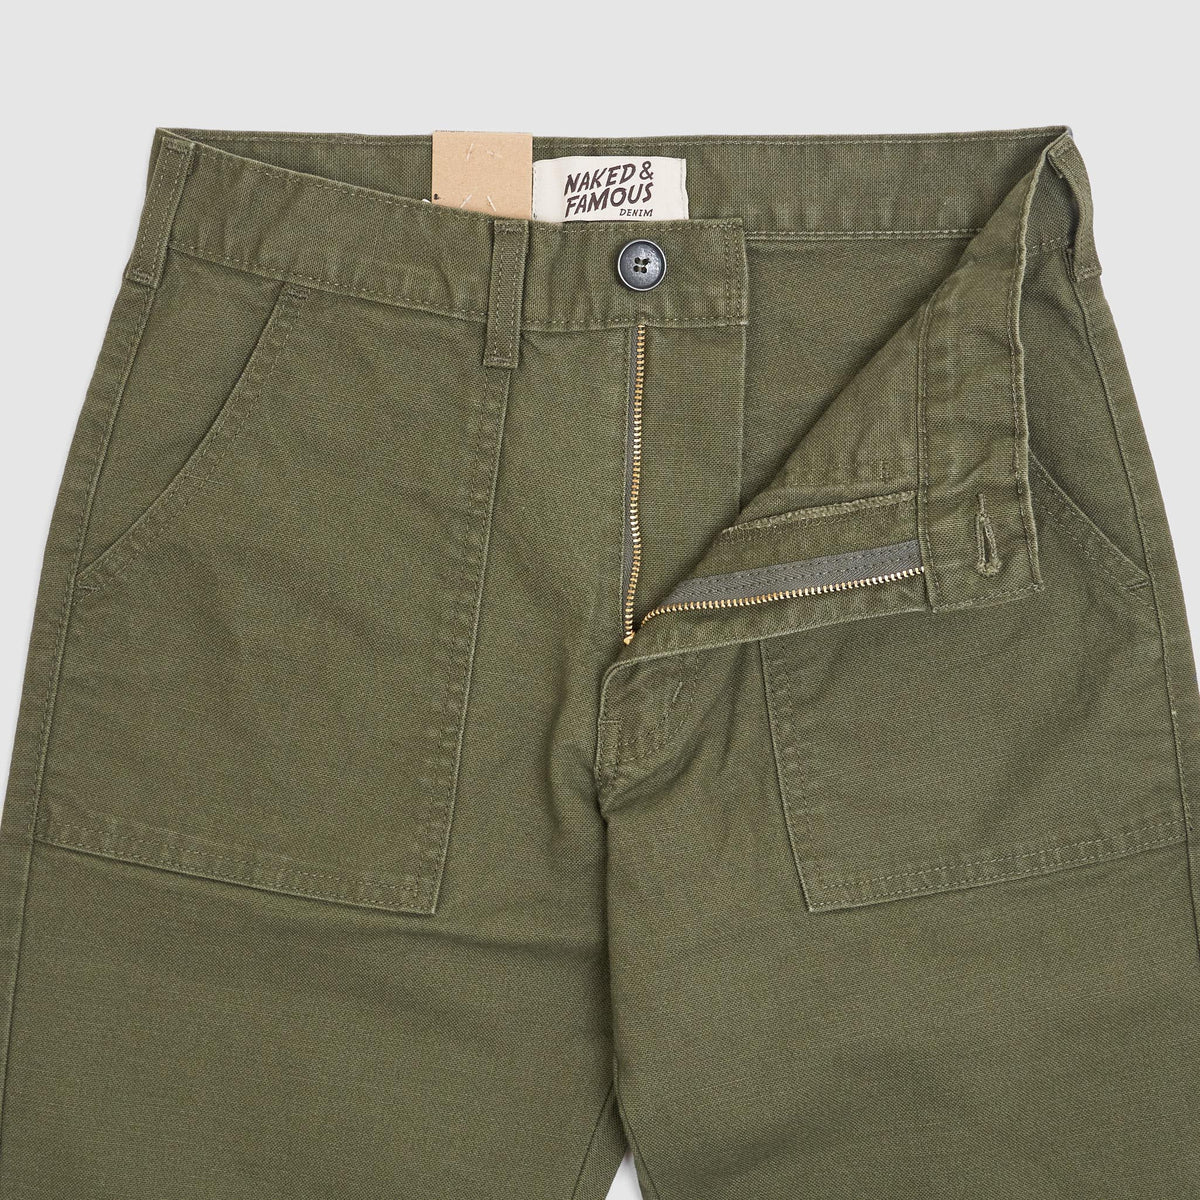 Naked &amp; Famous Ladies Fatigue Pants